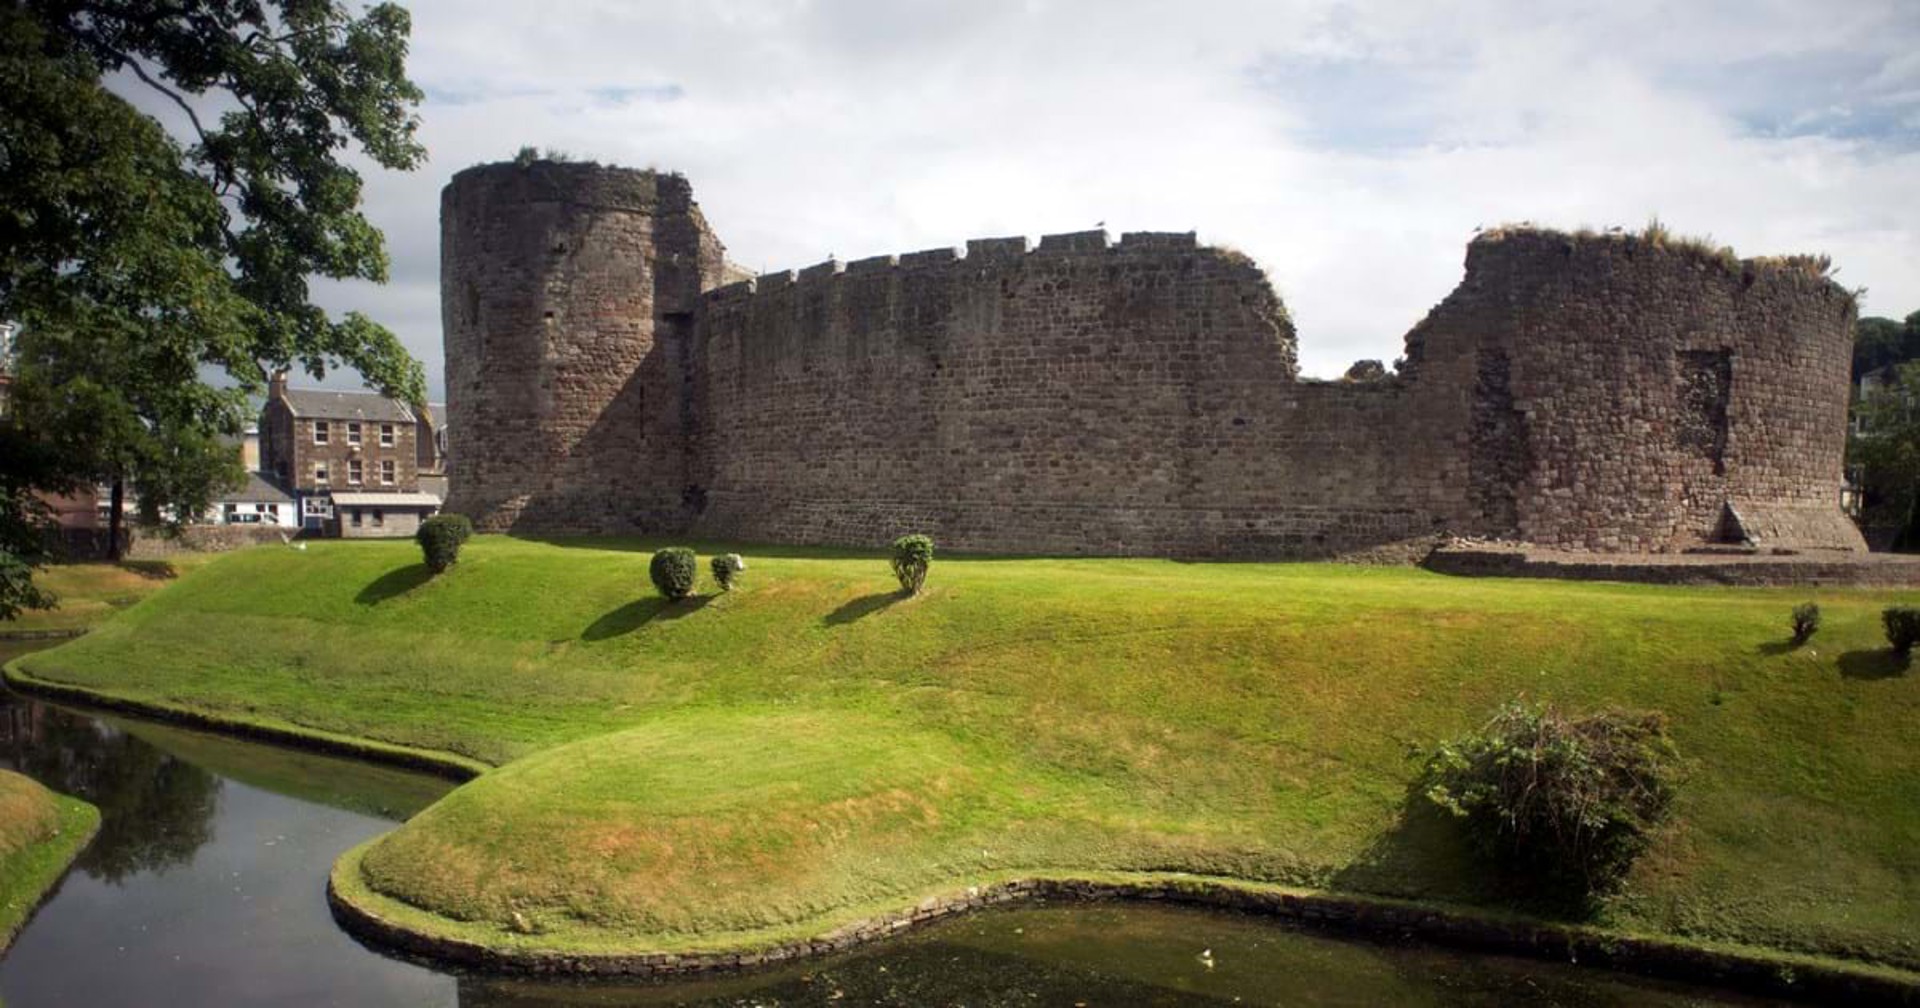 Background image - rothesay_castle_hes.jpg